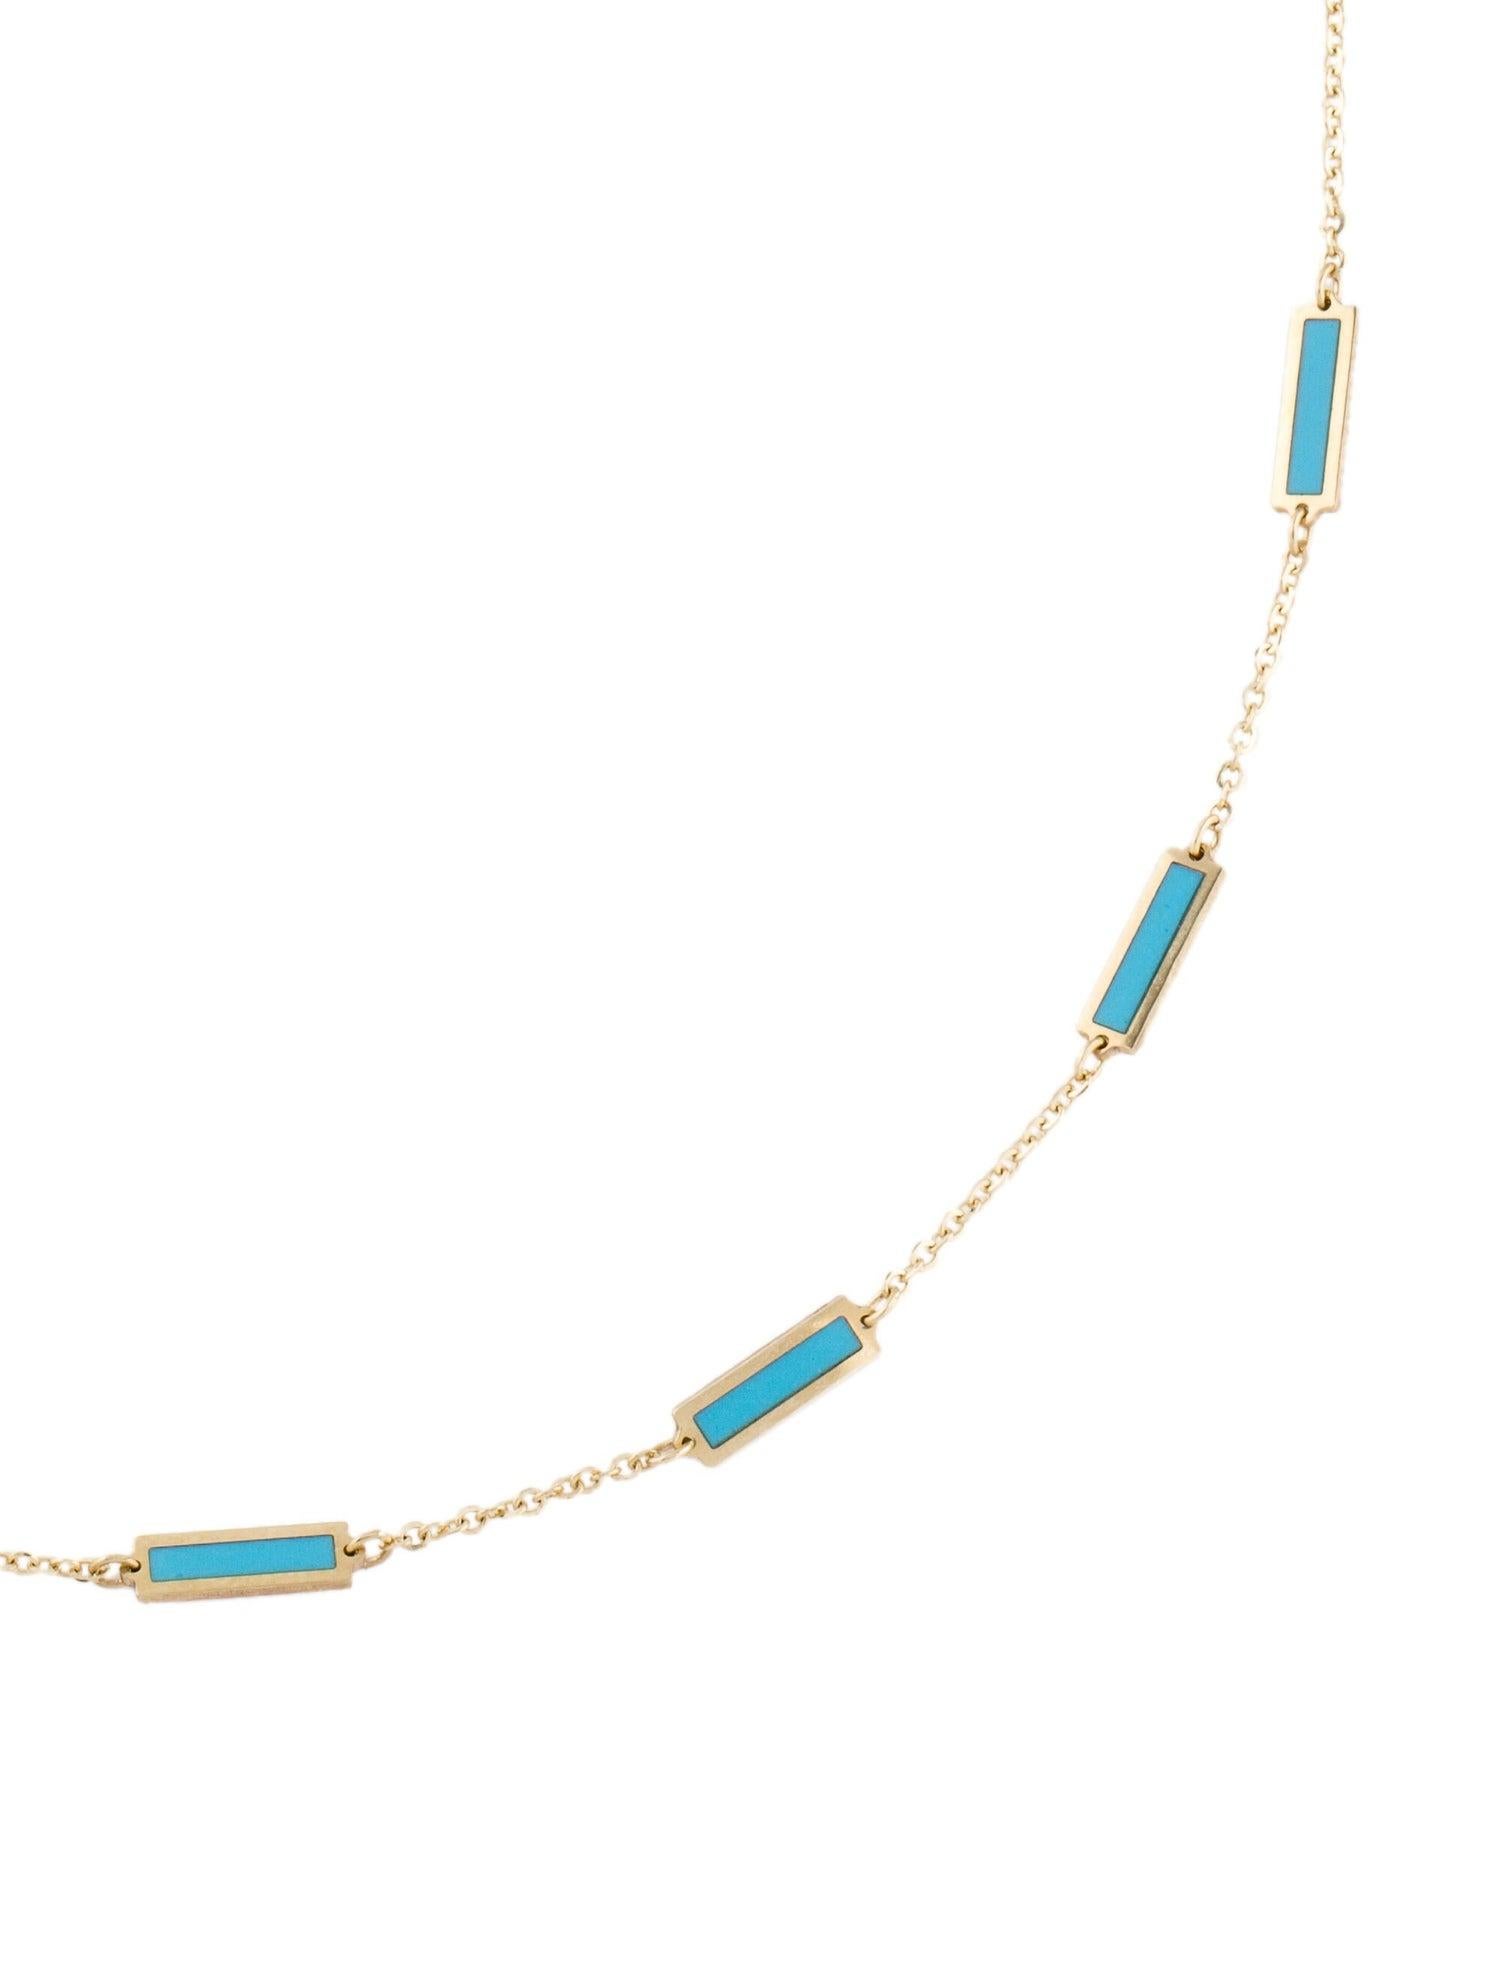 Contemporary 14k Yellow Gold & Light Pink Inlay Station Bar Necklace, Made in Italy For Sale